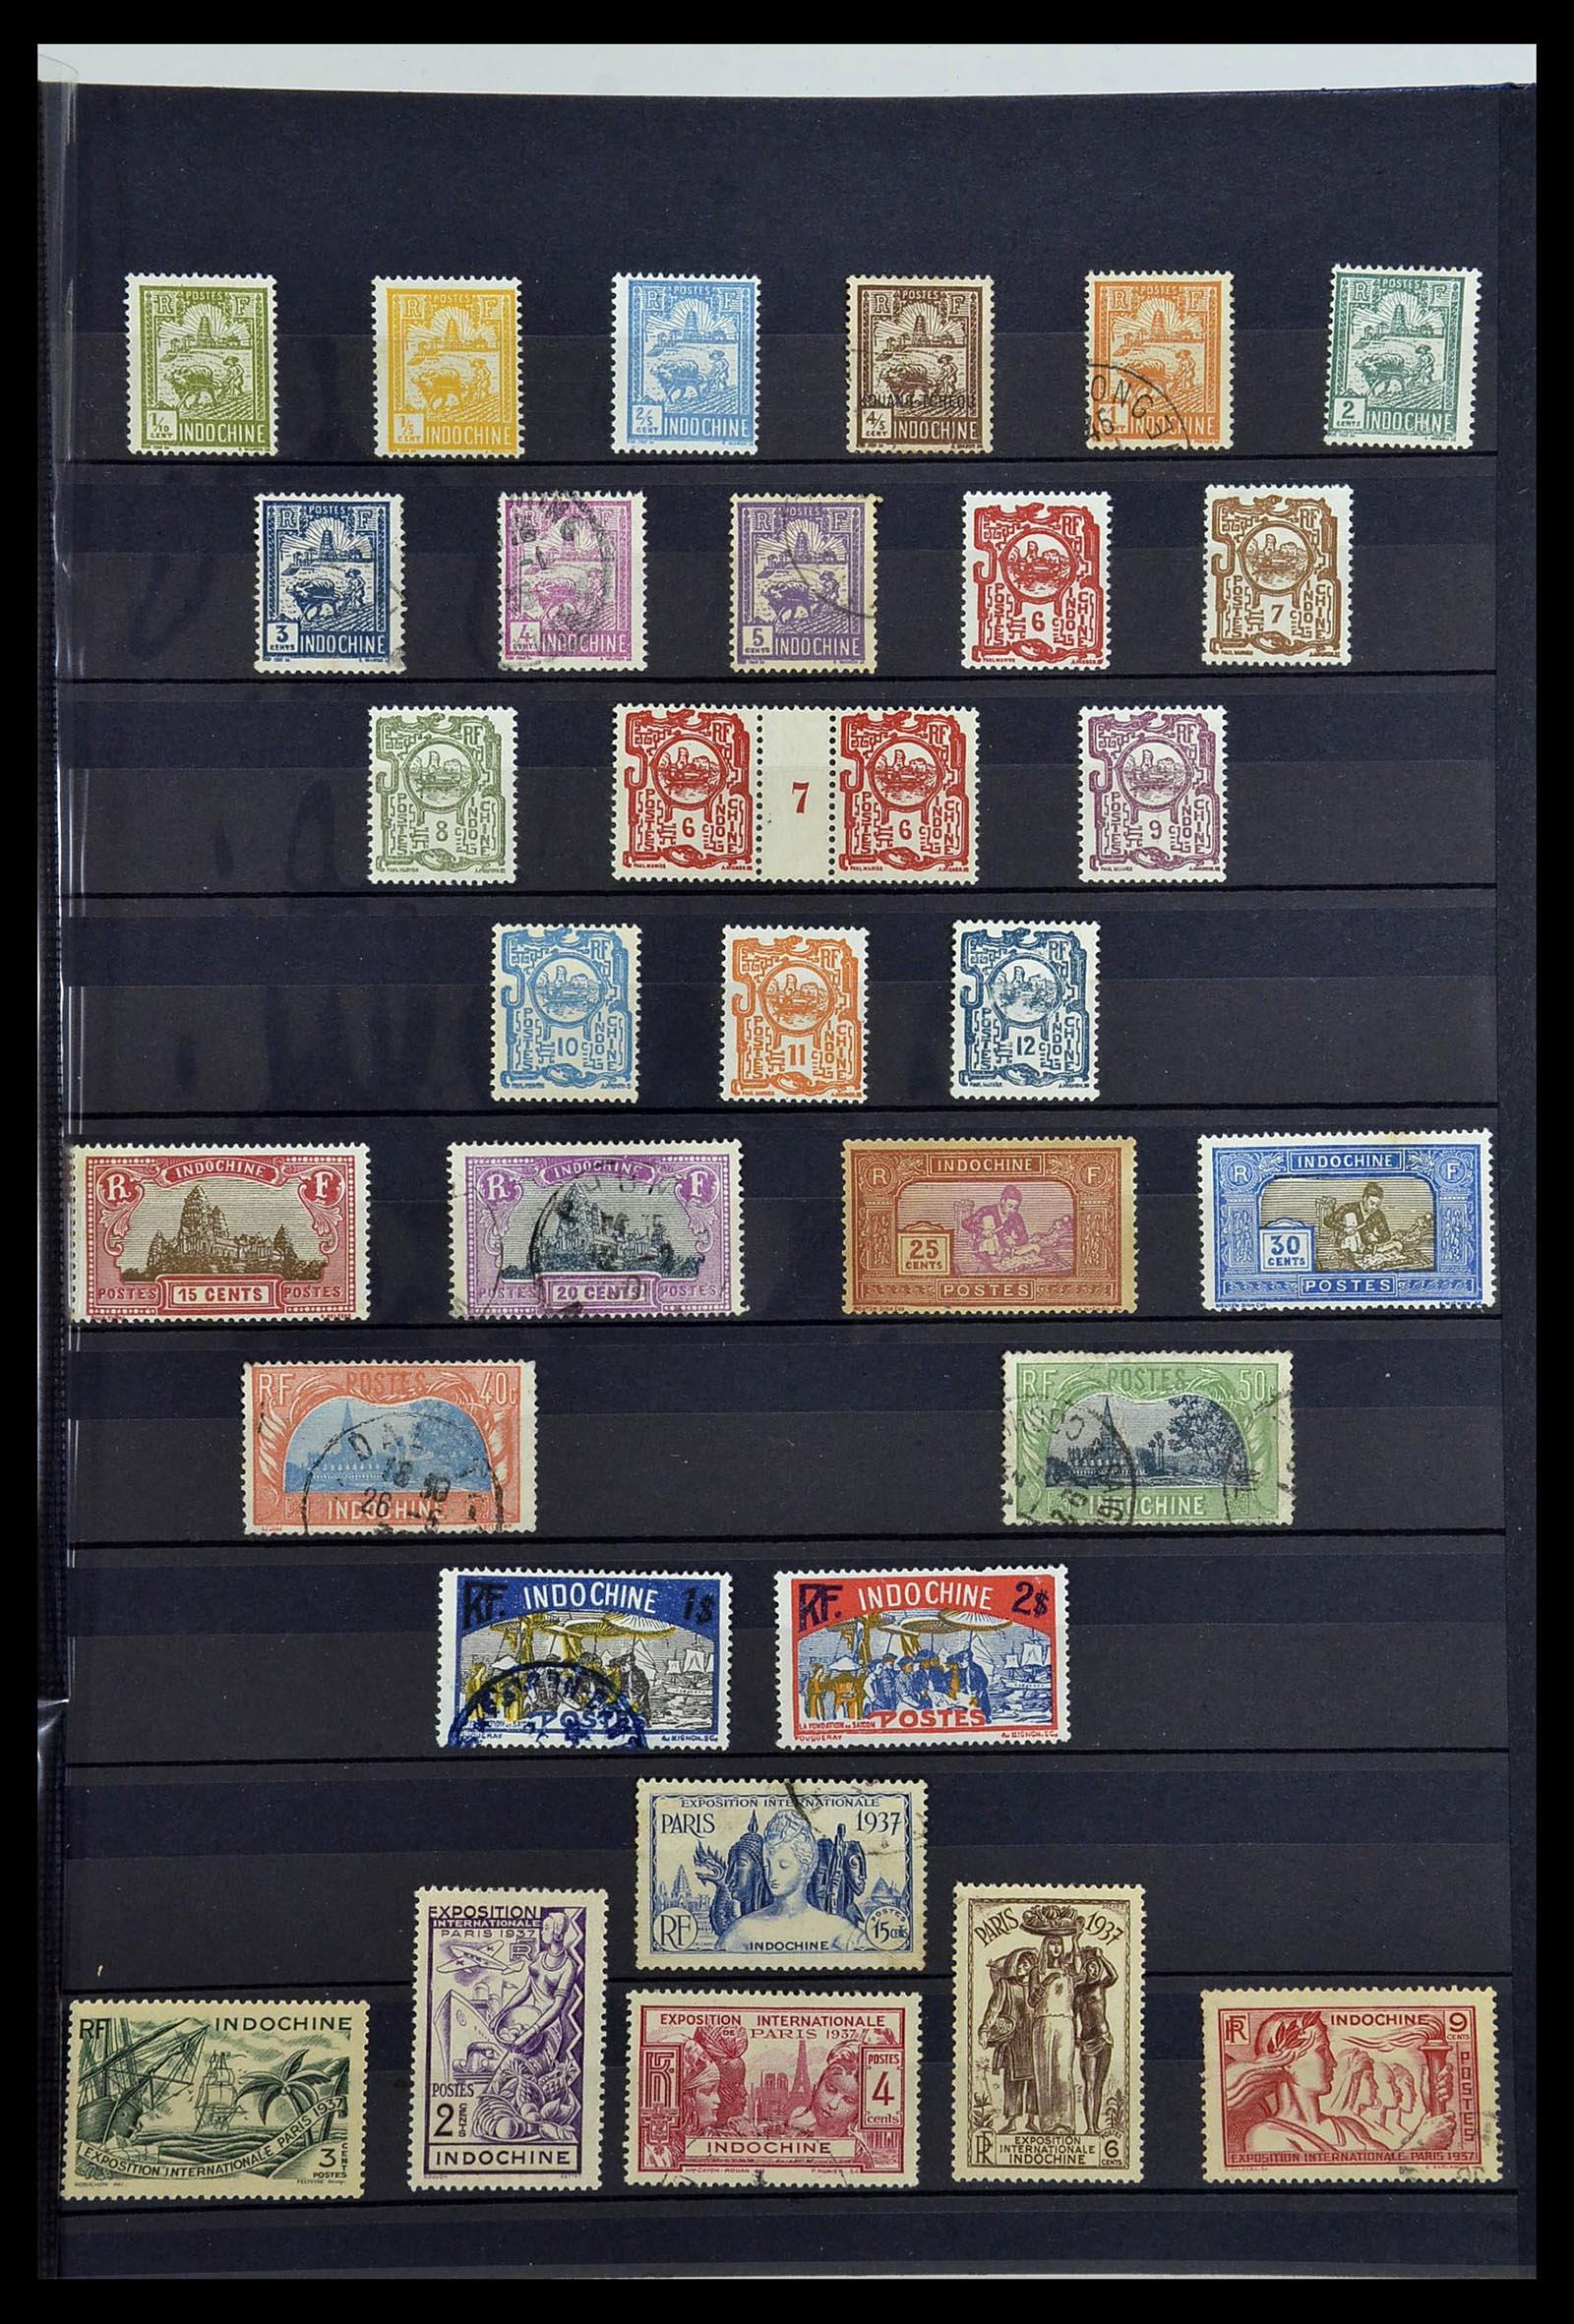 34218 005 - Stamp collection 34218 Indochine 1889-1945.